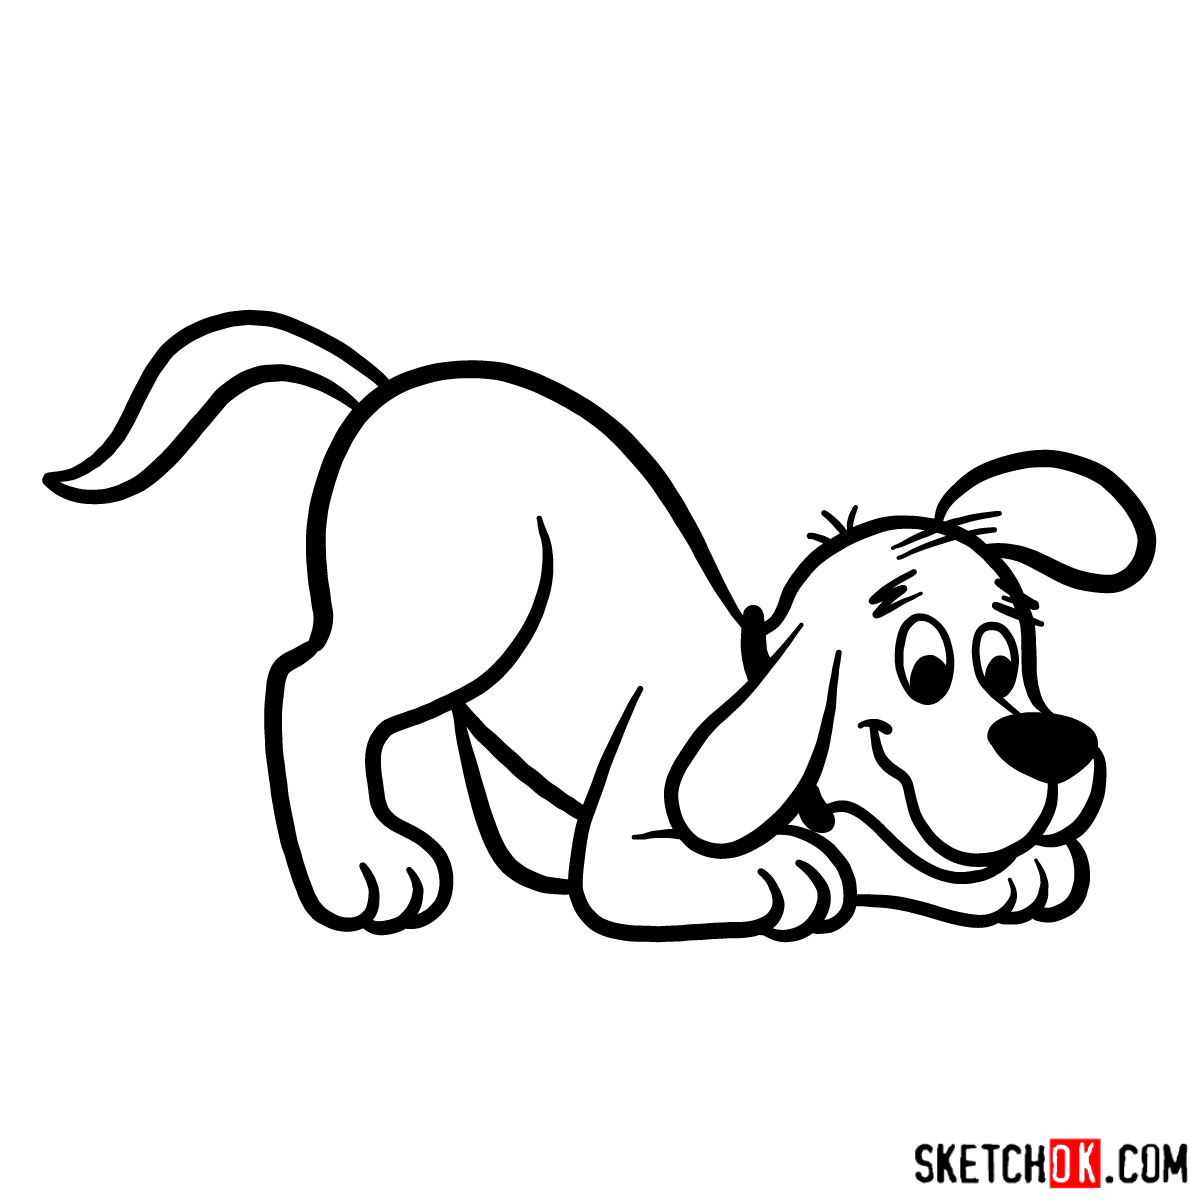 How to draw Clifford the Big Red Dog - step 09